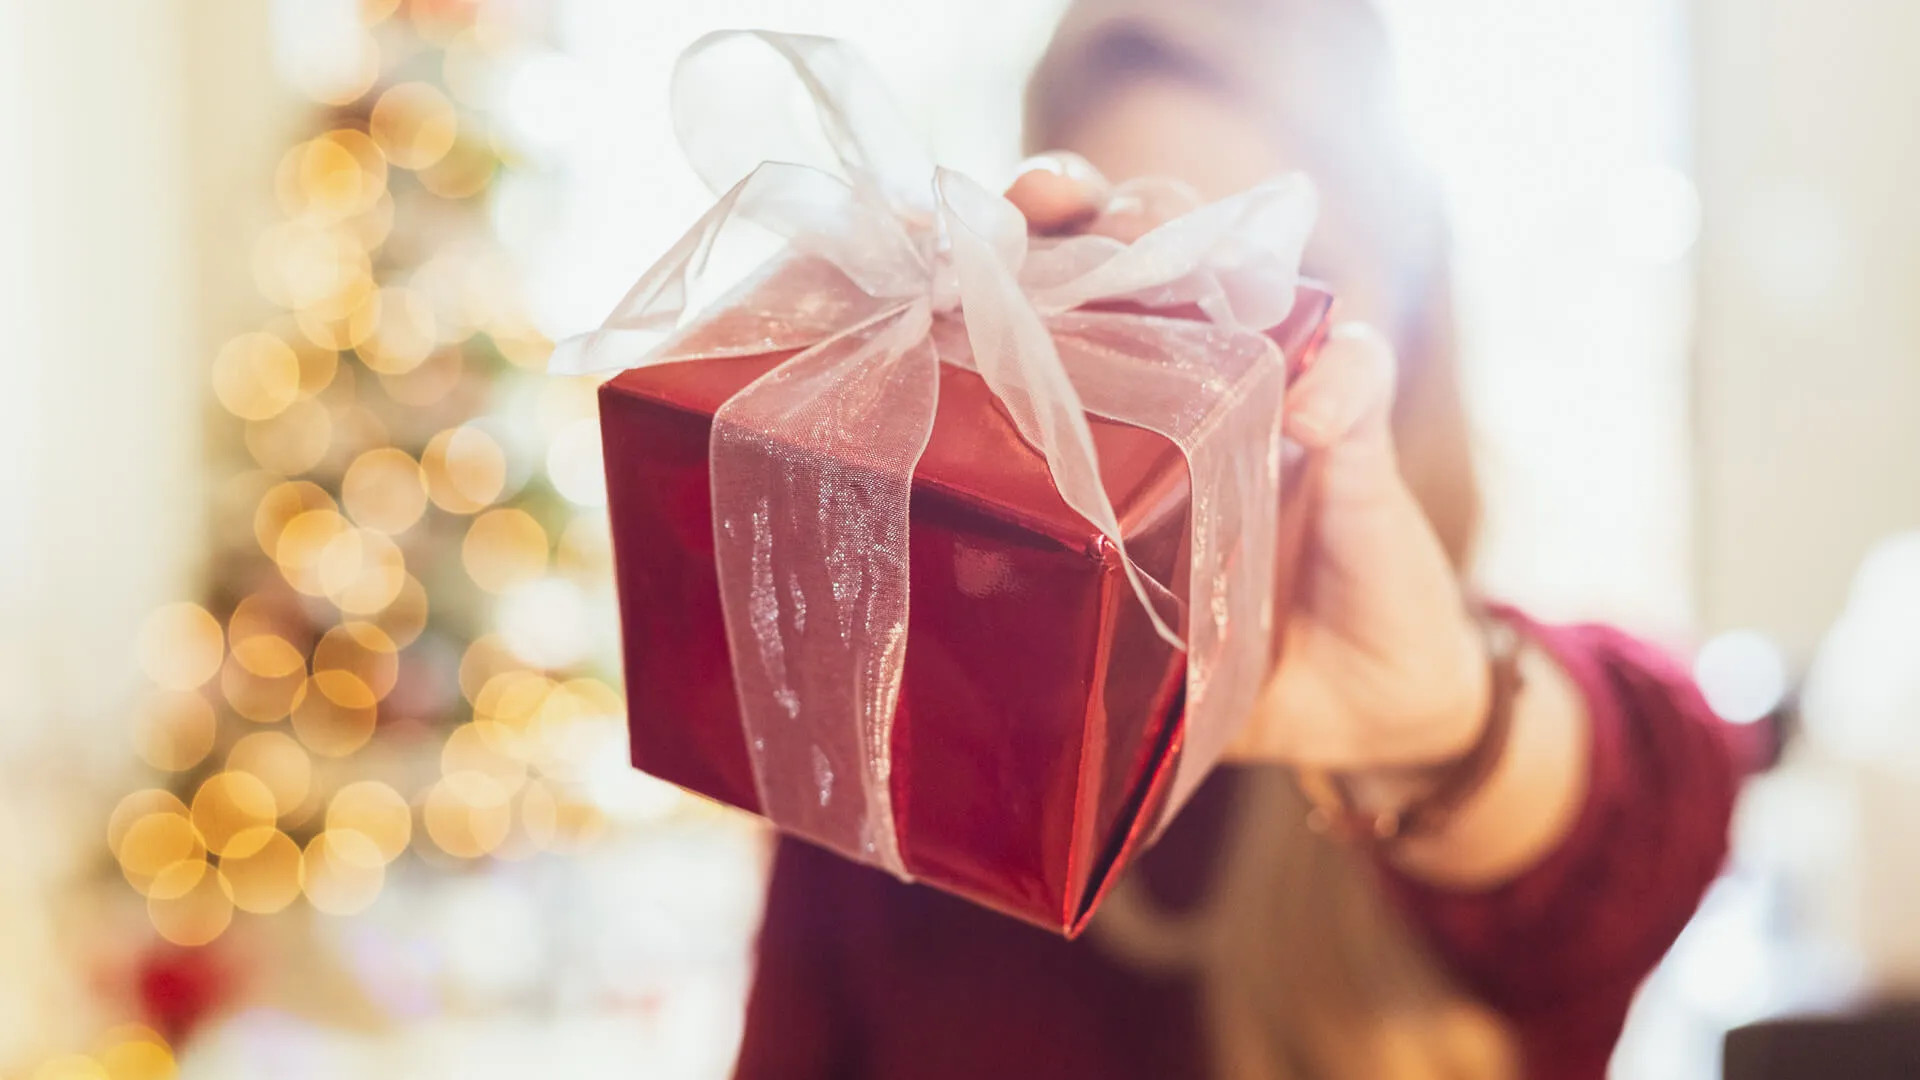 Unrecognizable woman holds a Christmas present wrapped in red paper and tied with a white transparent bow.